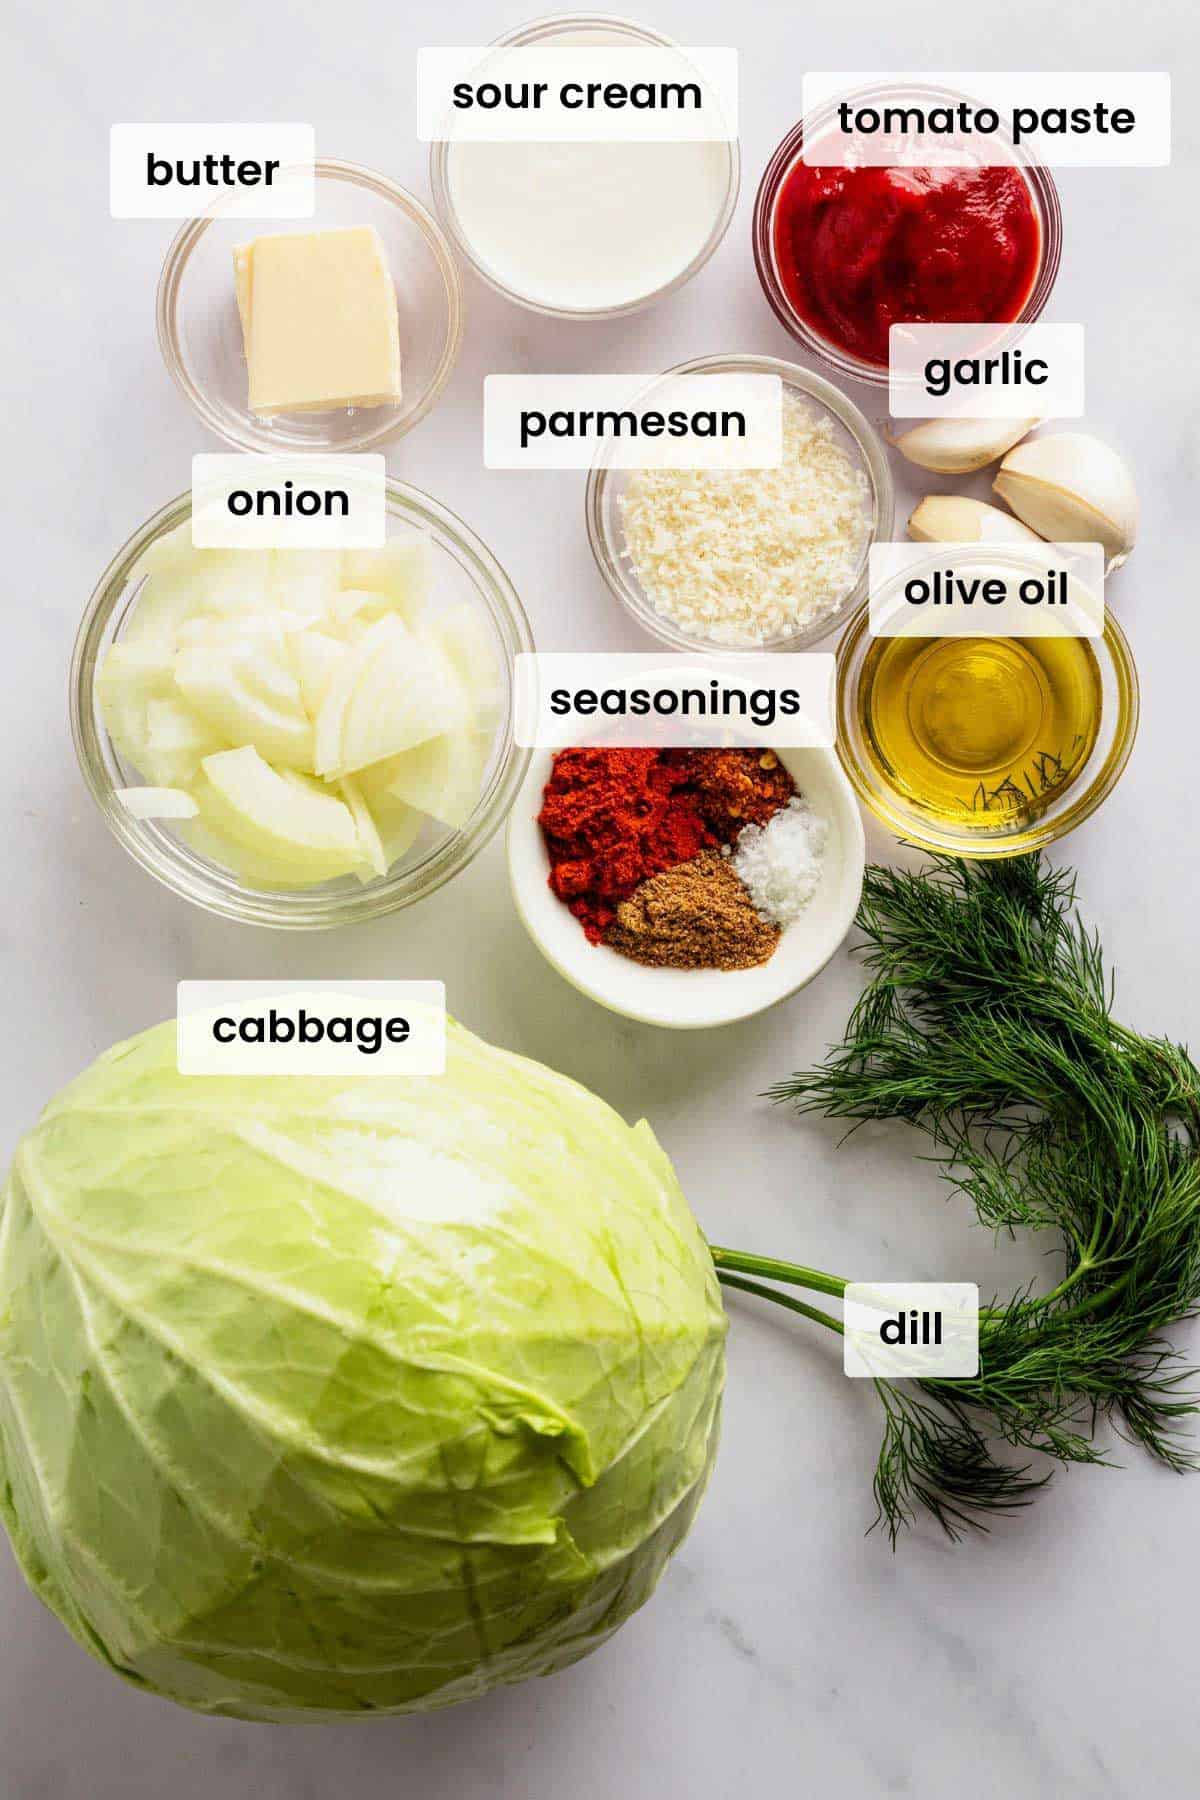 ingredients for oven baked cabbage wedges.